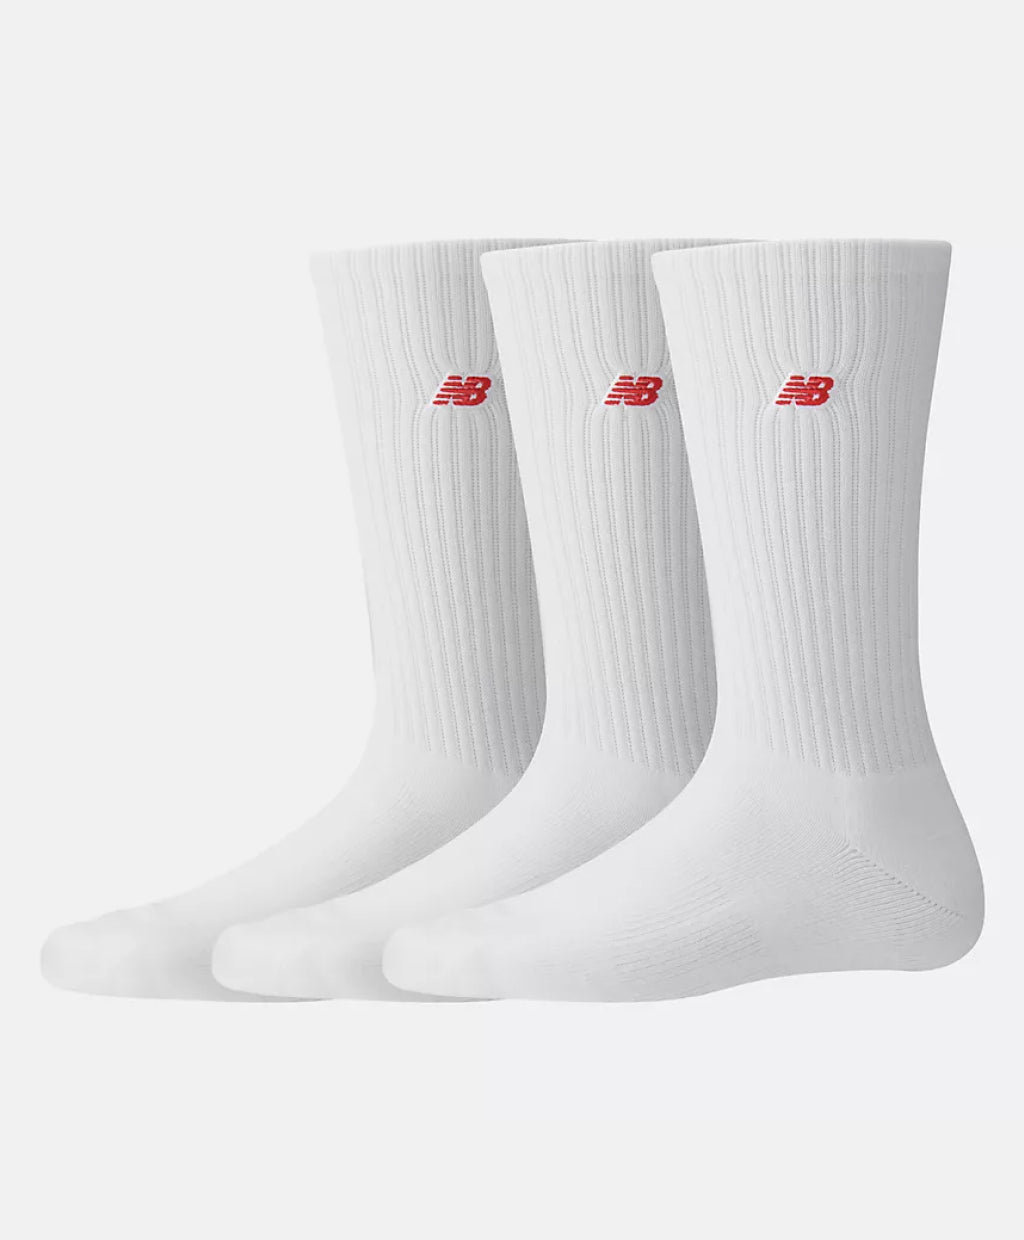 PATCH LOGO SOCK 3 PACK